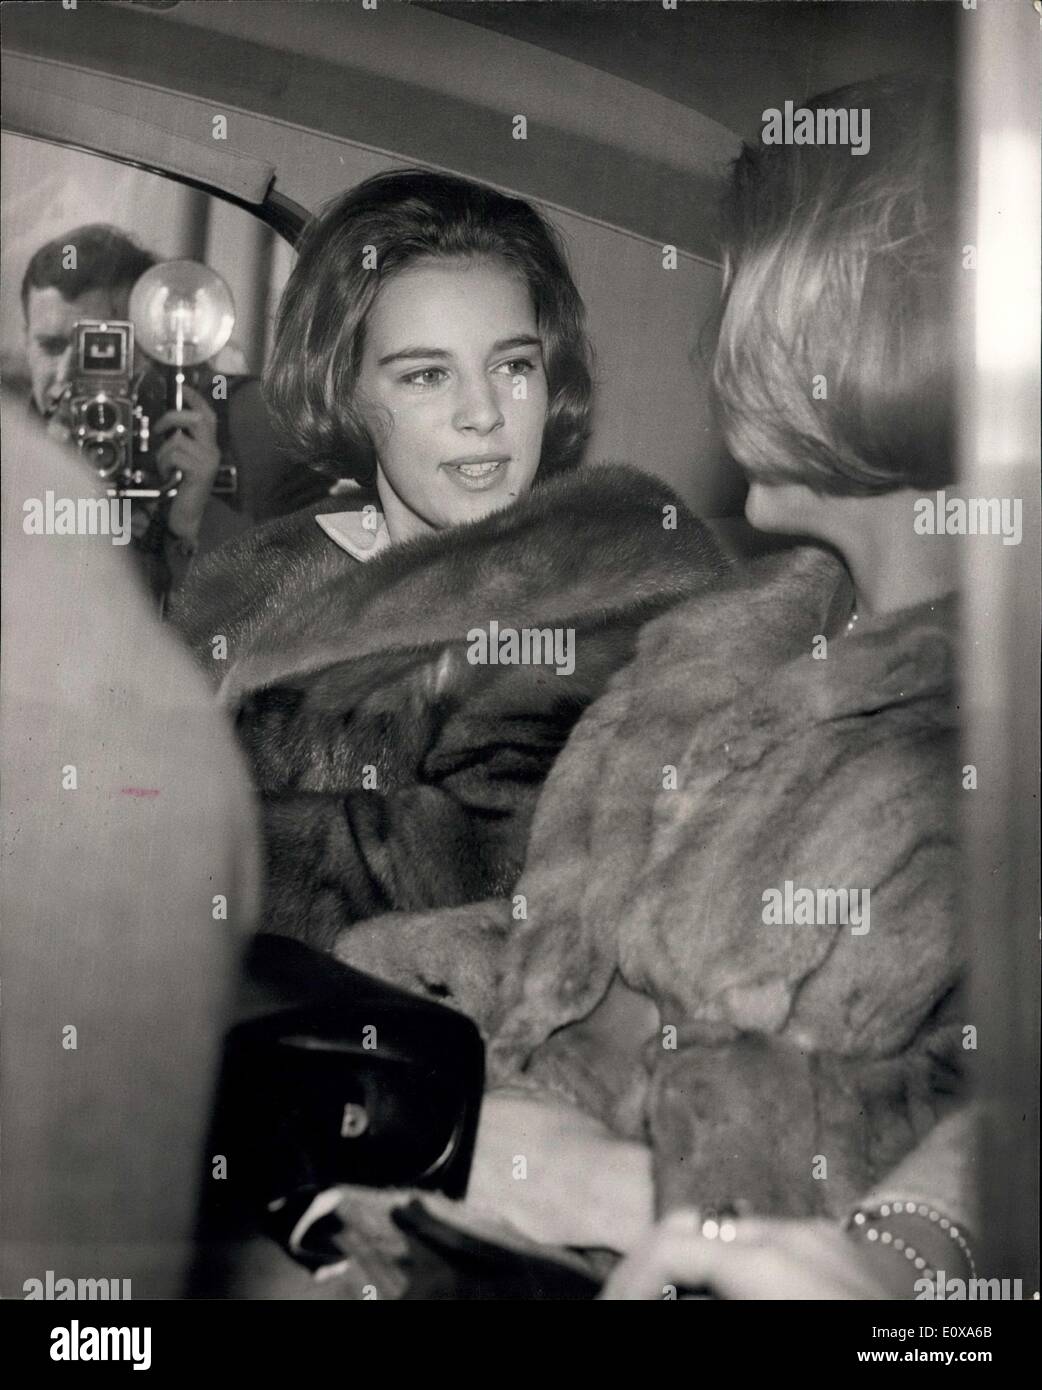 Nov. 06, 1965 - Queen Anne-Marine Arrives by Air from Denmark to join her Husband King Constantine in London: Queen Anne-Marie arrived at London Airport this morning when she flew in from Copenhagen to join her husband King Constantine of Greece, who has been attending a yachting conference in London.Their baby daughter Princess Alexia is remaing in Denmark with her grandparents, the King and Queen of Denmark. Photo Shows Queen Anne-Marie pictured in a car as she drove away from the airport today. Stock Photo